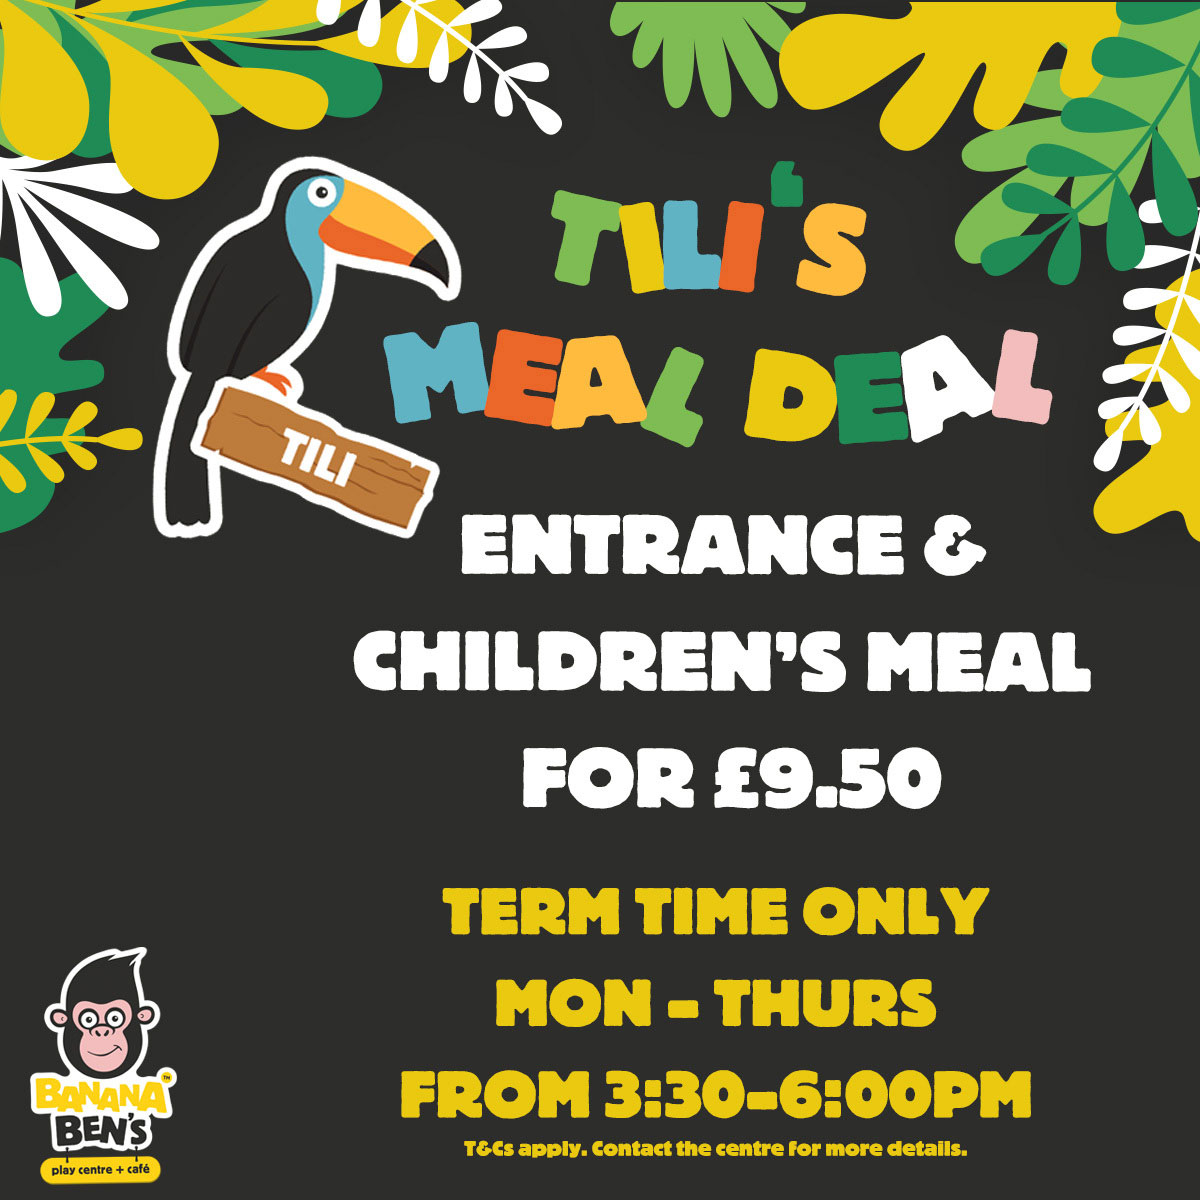 Meal deal is available for £8.50 on Mon - Thurs 15:30 to 18:00 during term time